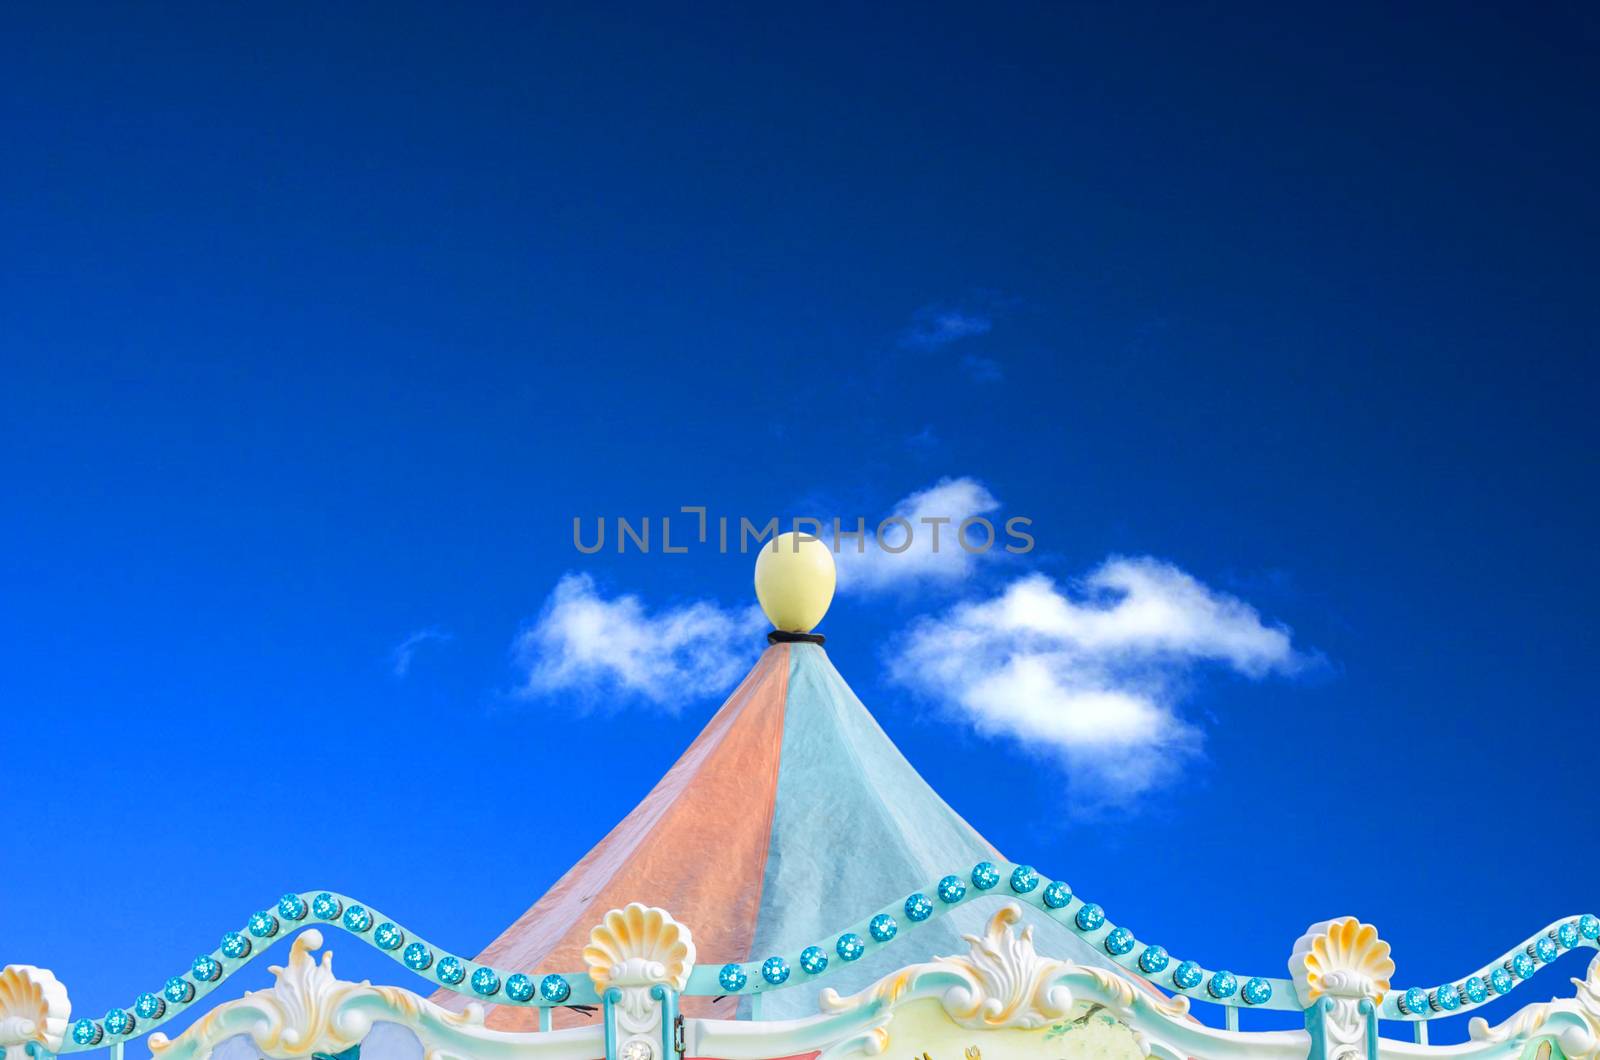 Circus carnival tent in front of a blue sky with clouds.